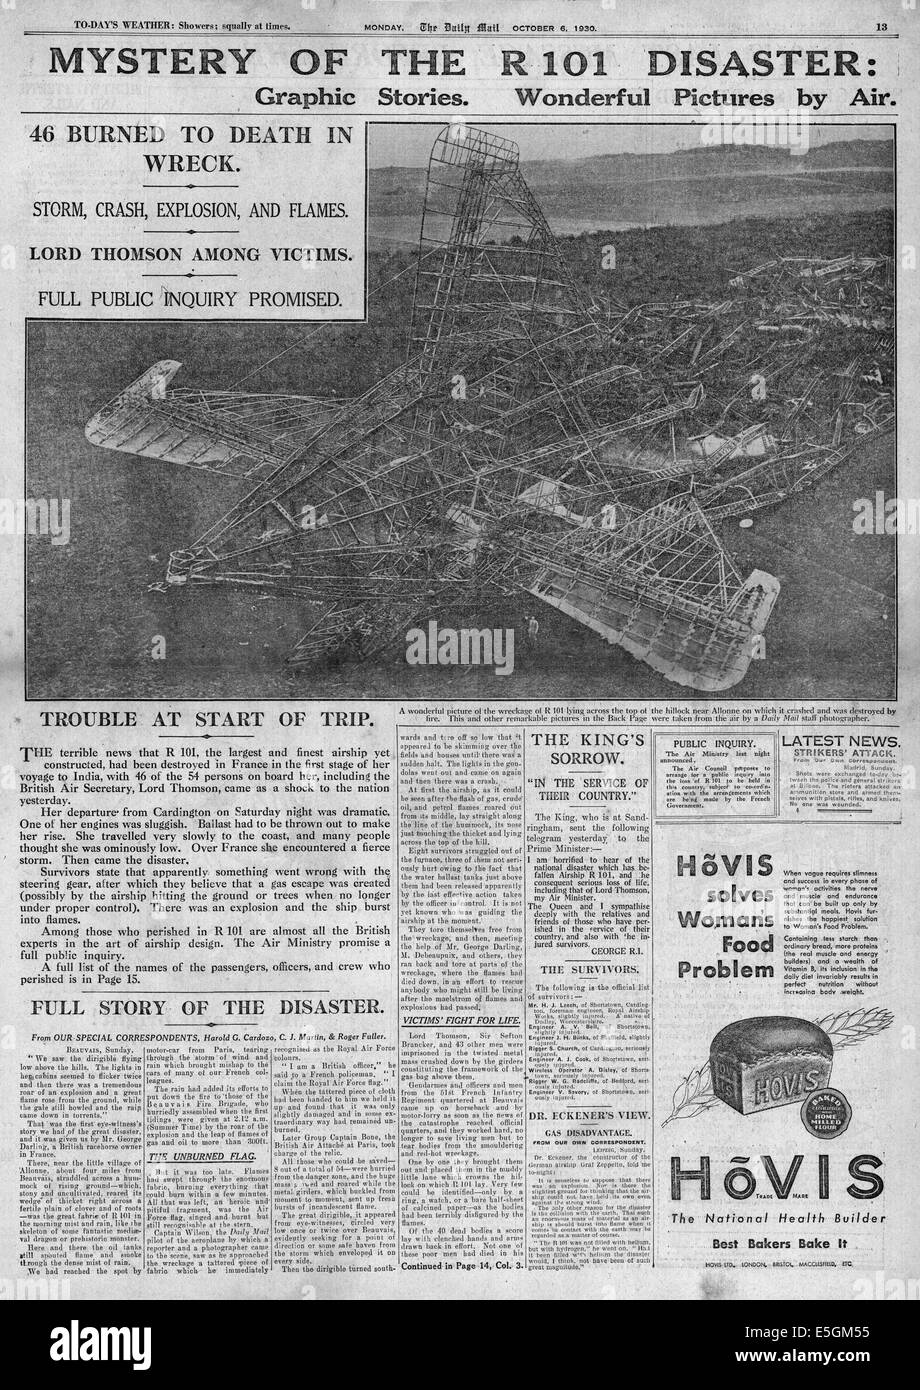 1930 Daily Mail pagina 13 reporting R101 dirigibile disastro a Beauvais, Francia Foto Stock